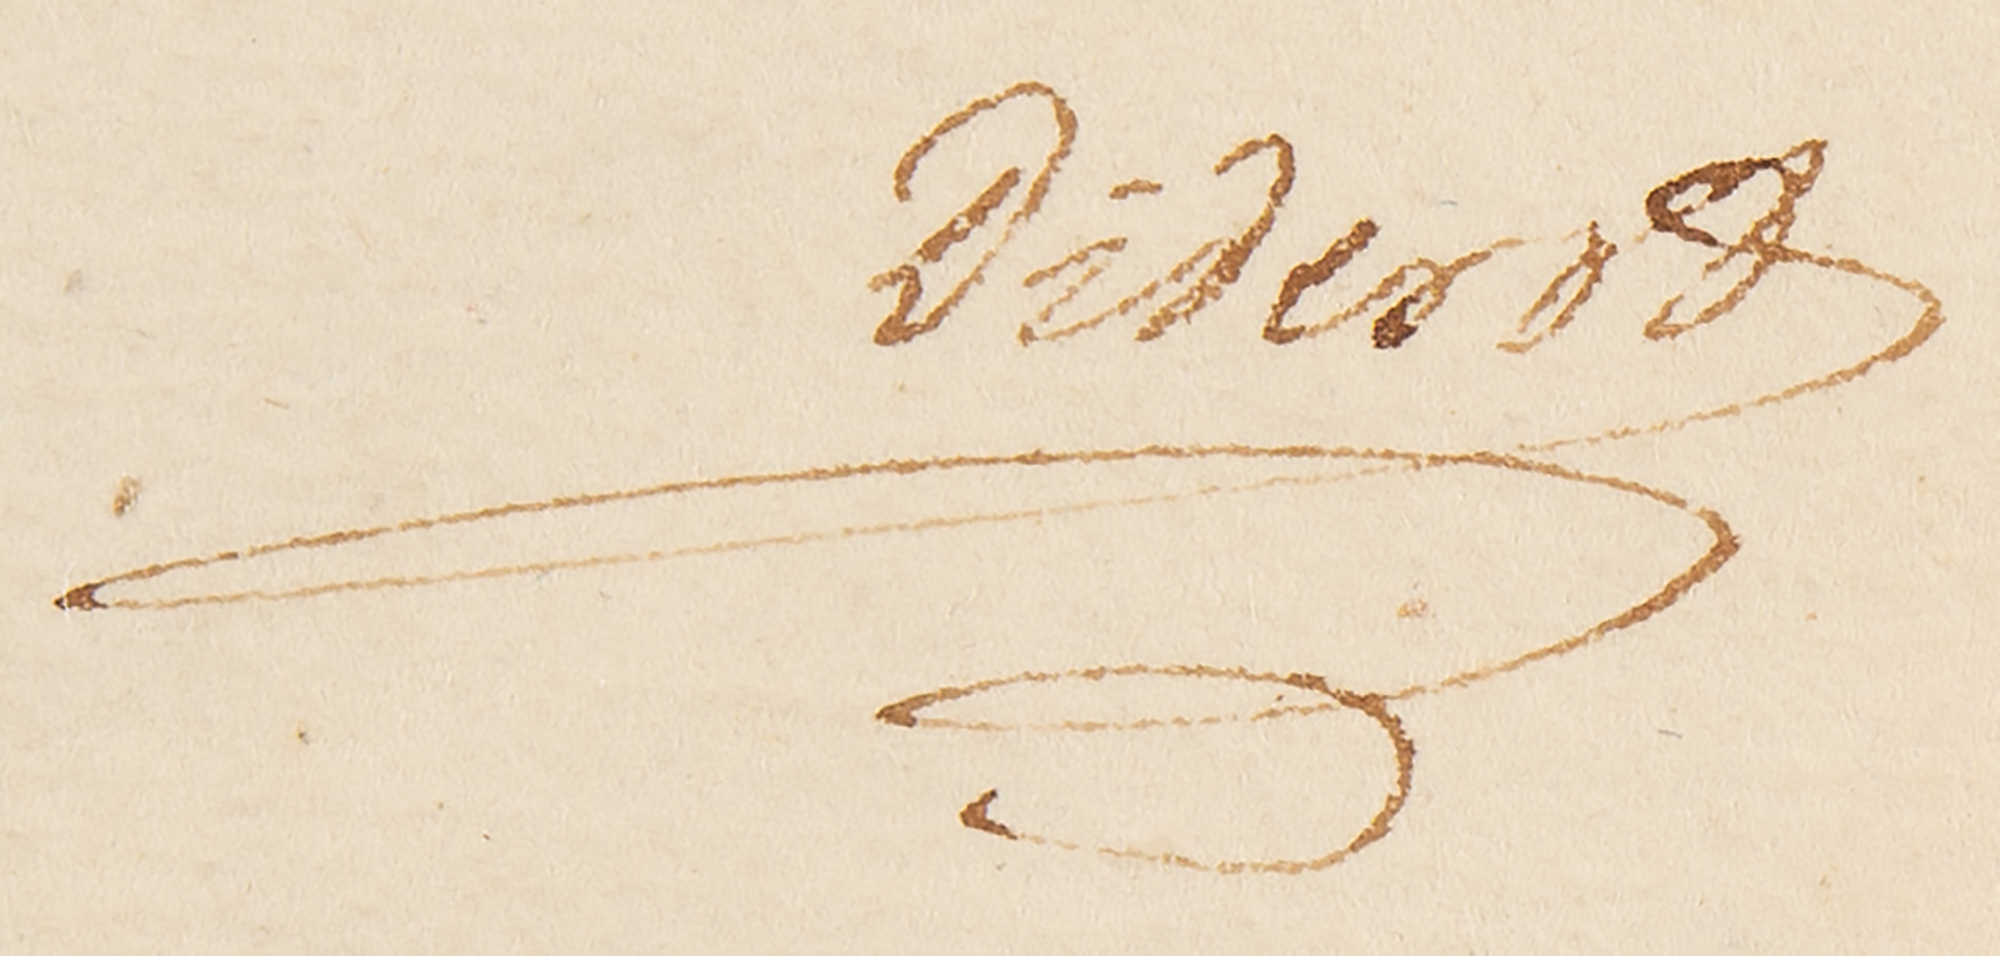 Denis Diderot Rare Autograph Letter Signed, Trading Work for Art | RR